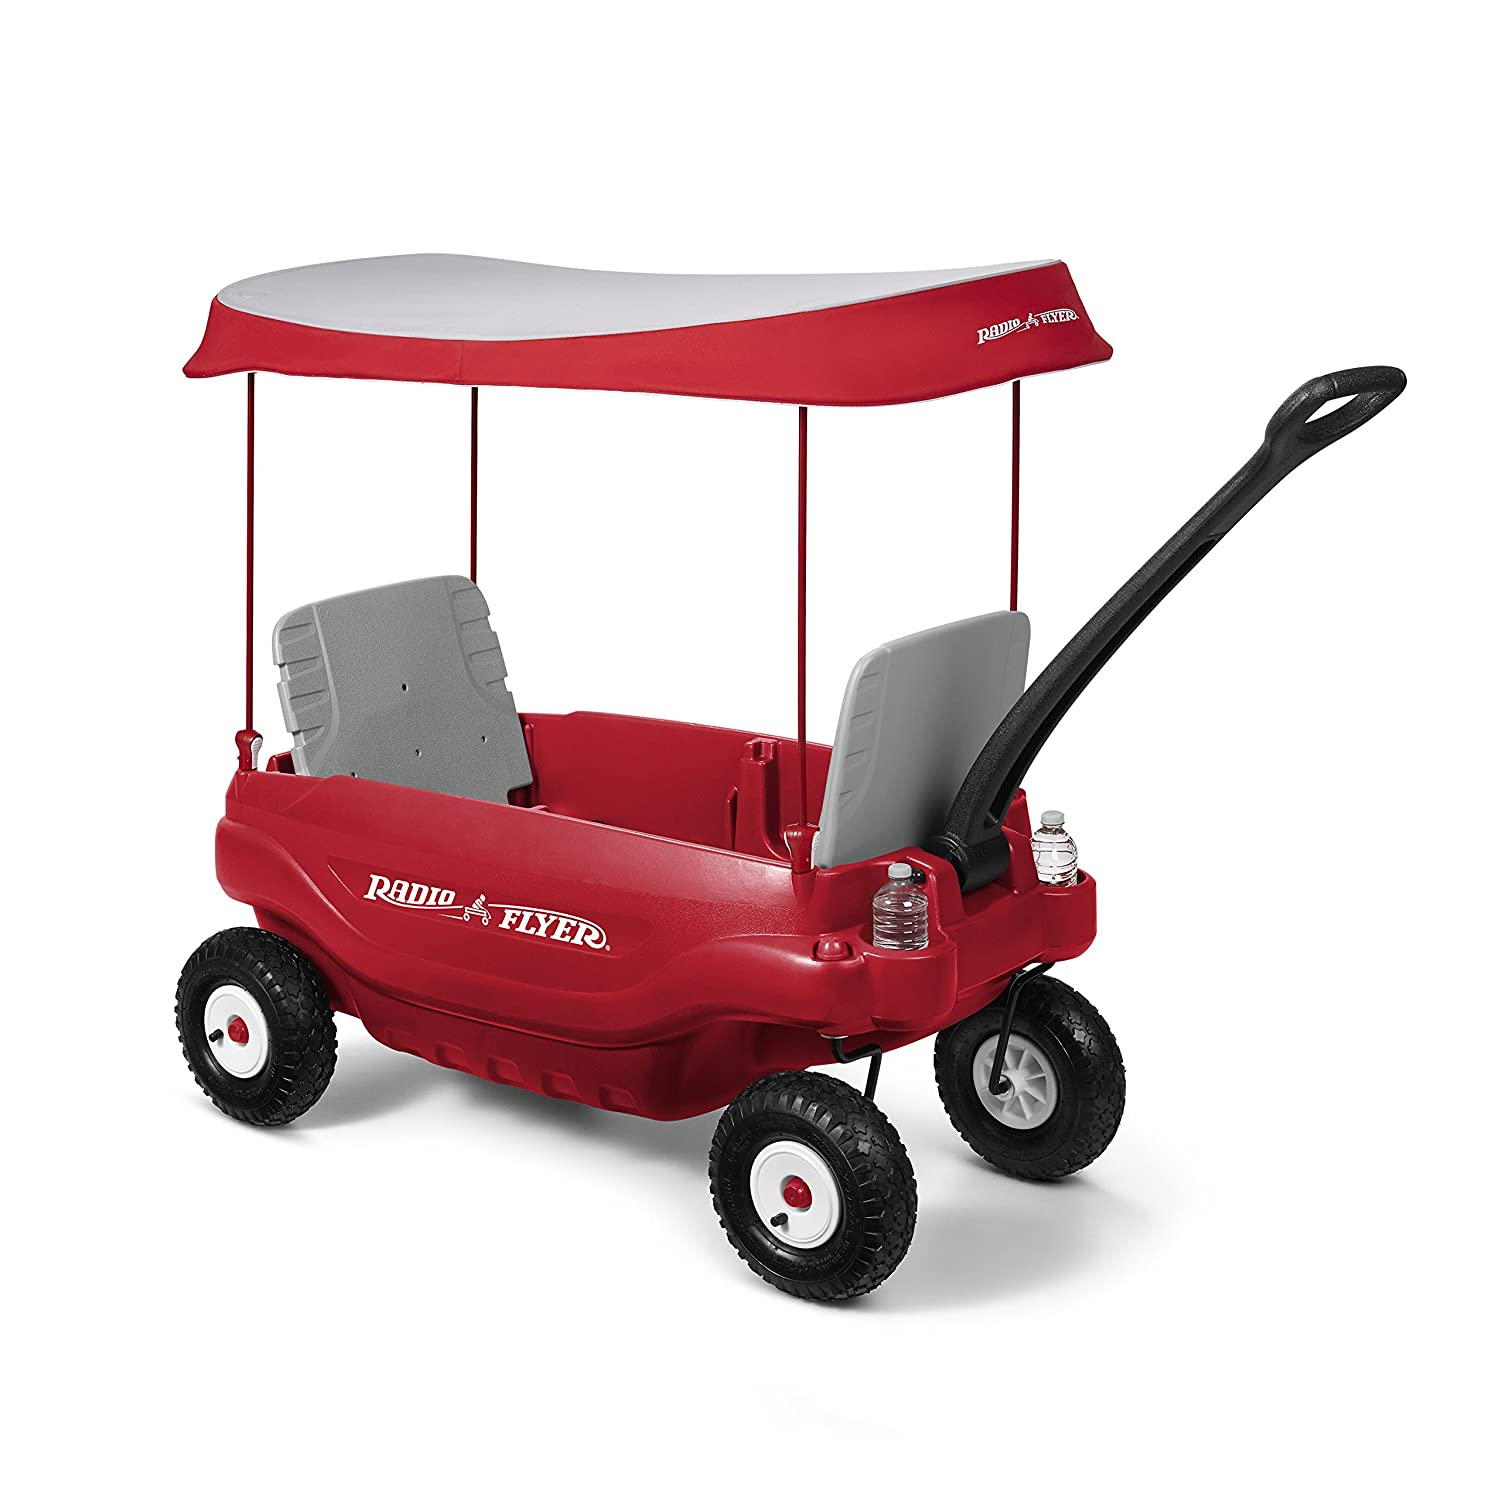 Top 10 Best Wagons for Kids Reviews in 2022 1